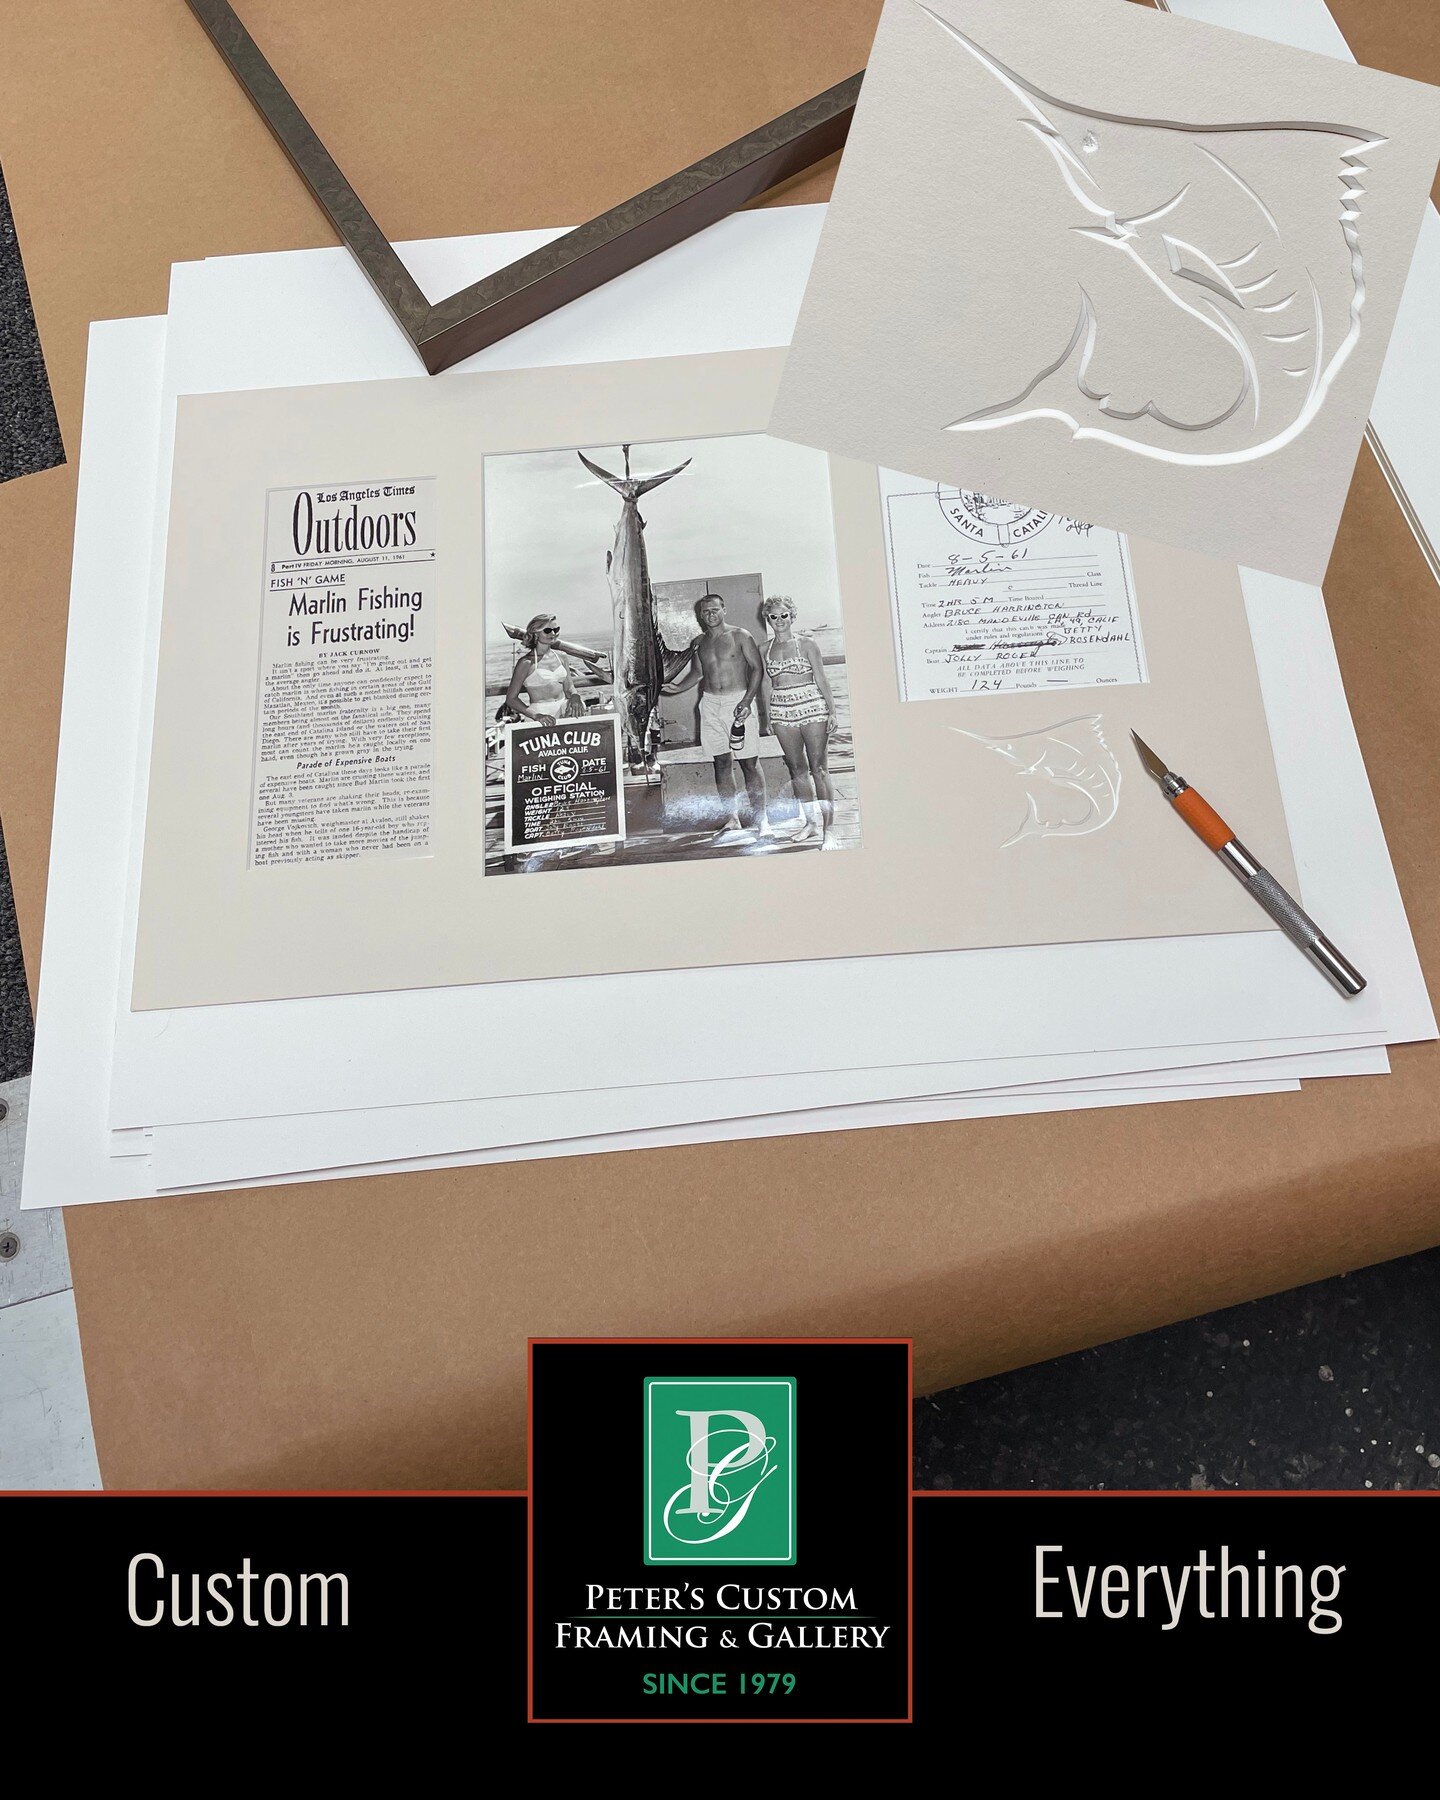 Thematic Matting is only the beginning of what we can do at Peter's Custom Gallery!

#ocsmallbusiness #southerncalifornia #catchoftheday #pictureframing